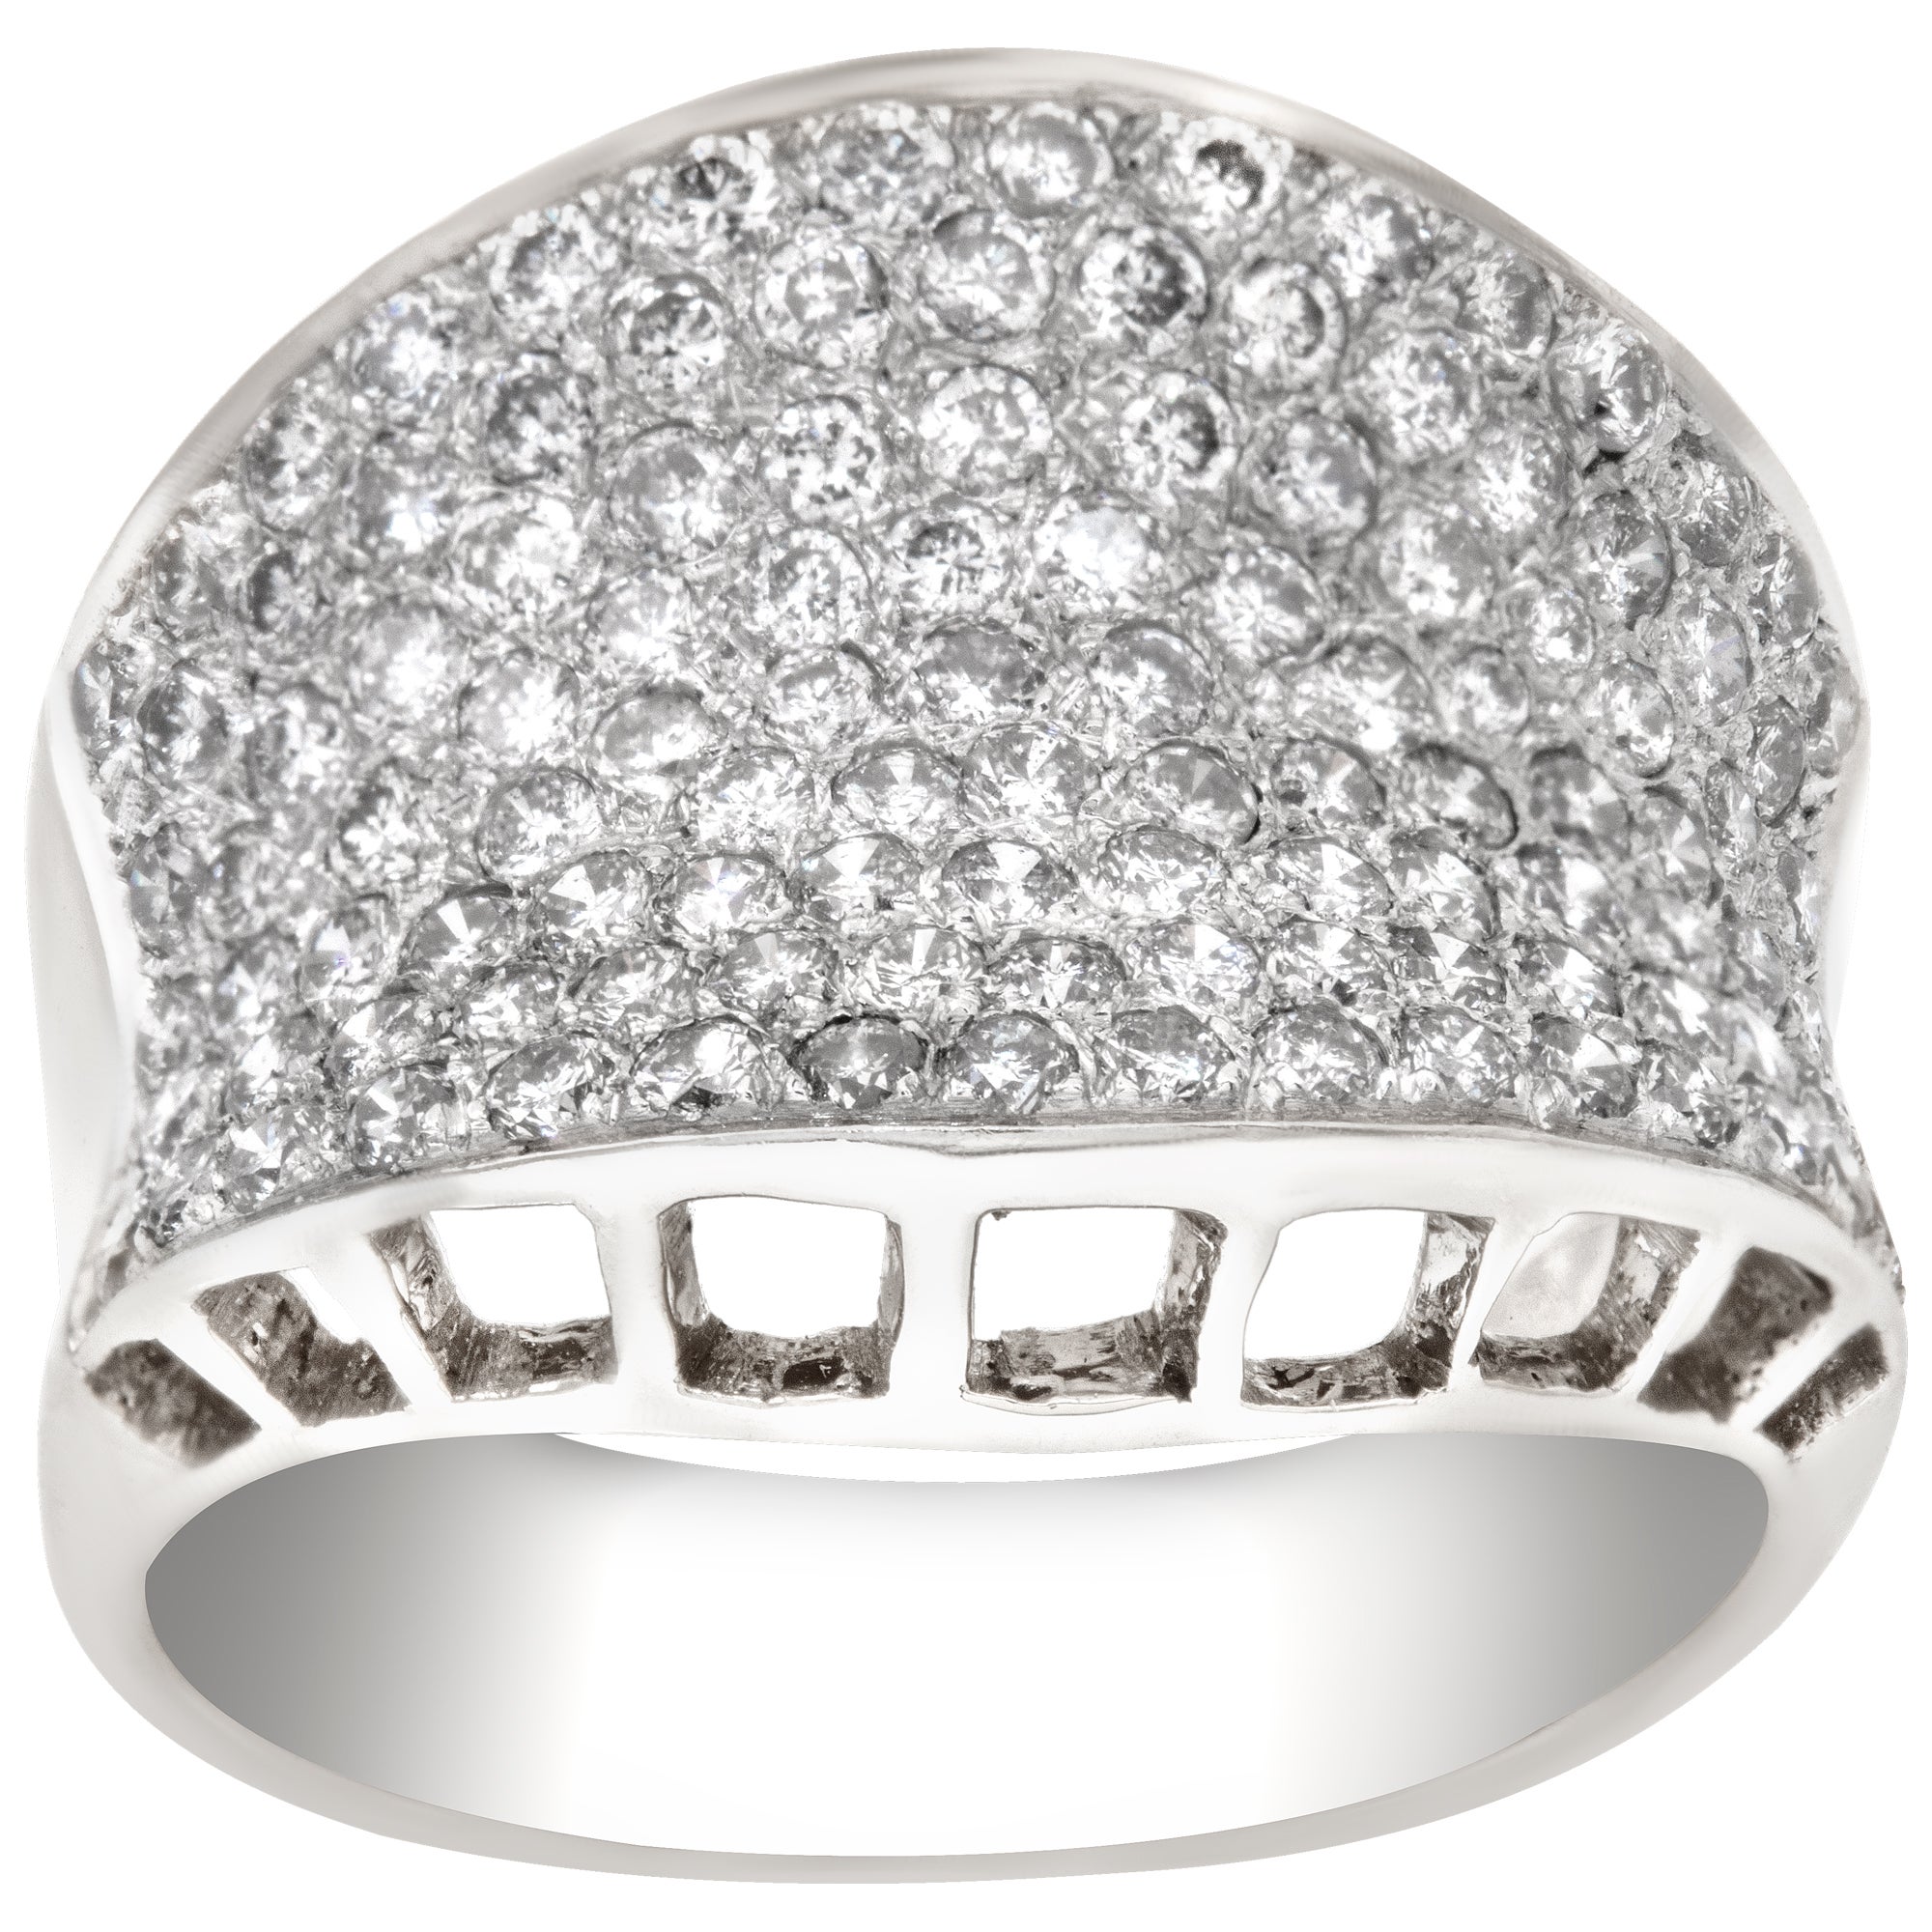 Exquisite pave diamond ring in 18k white gold. 1.25 carats in pave diamonds For Sale